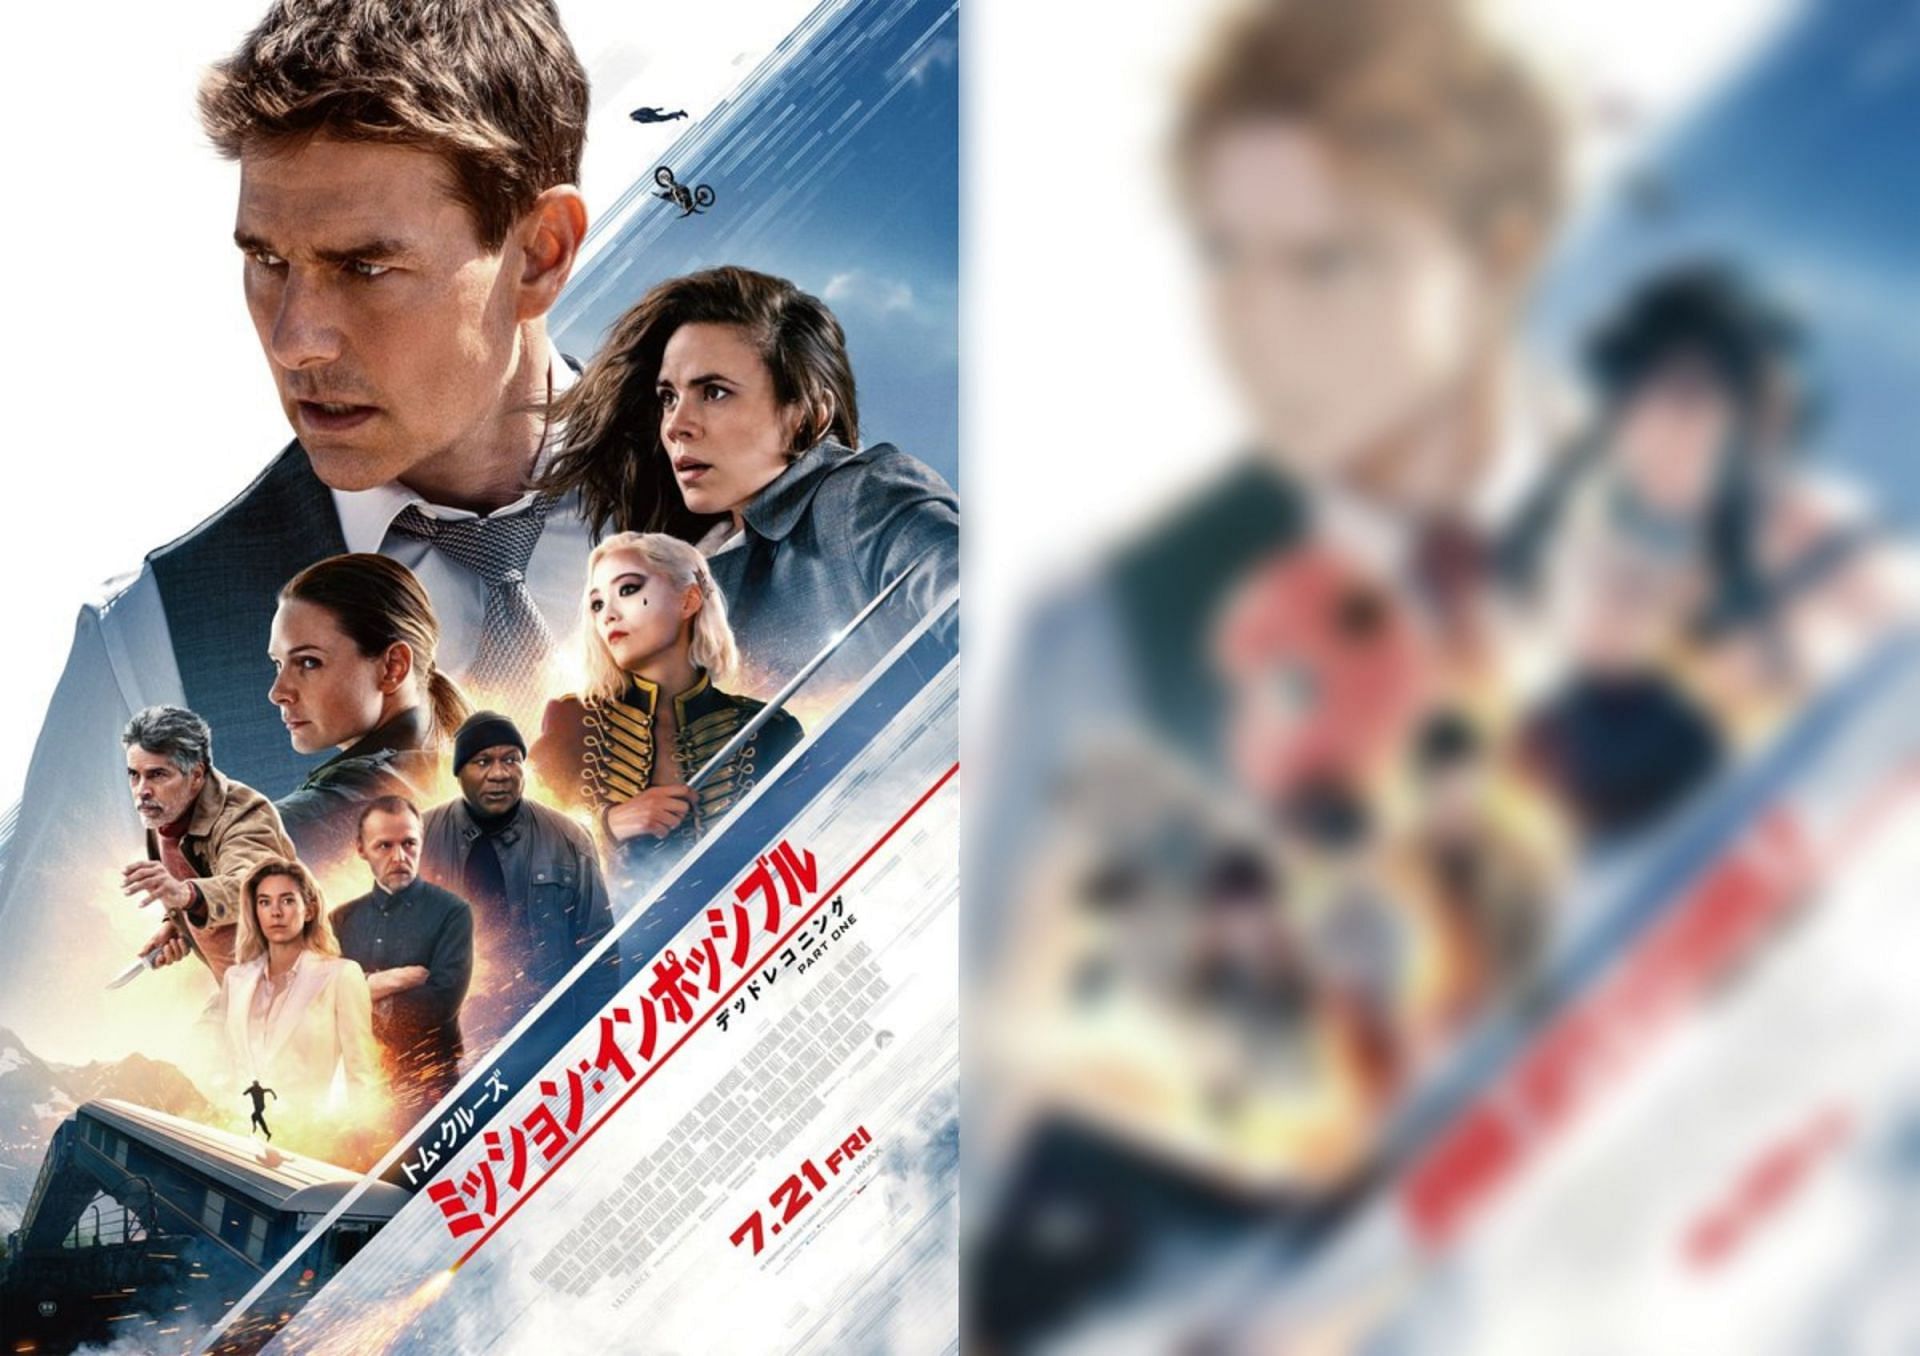 Spy X Family gets a special collaboration with Mission Impossible franchise